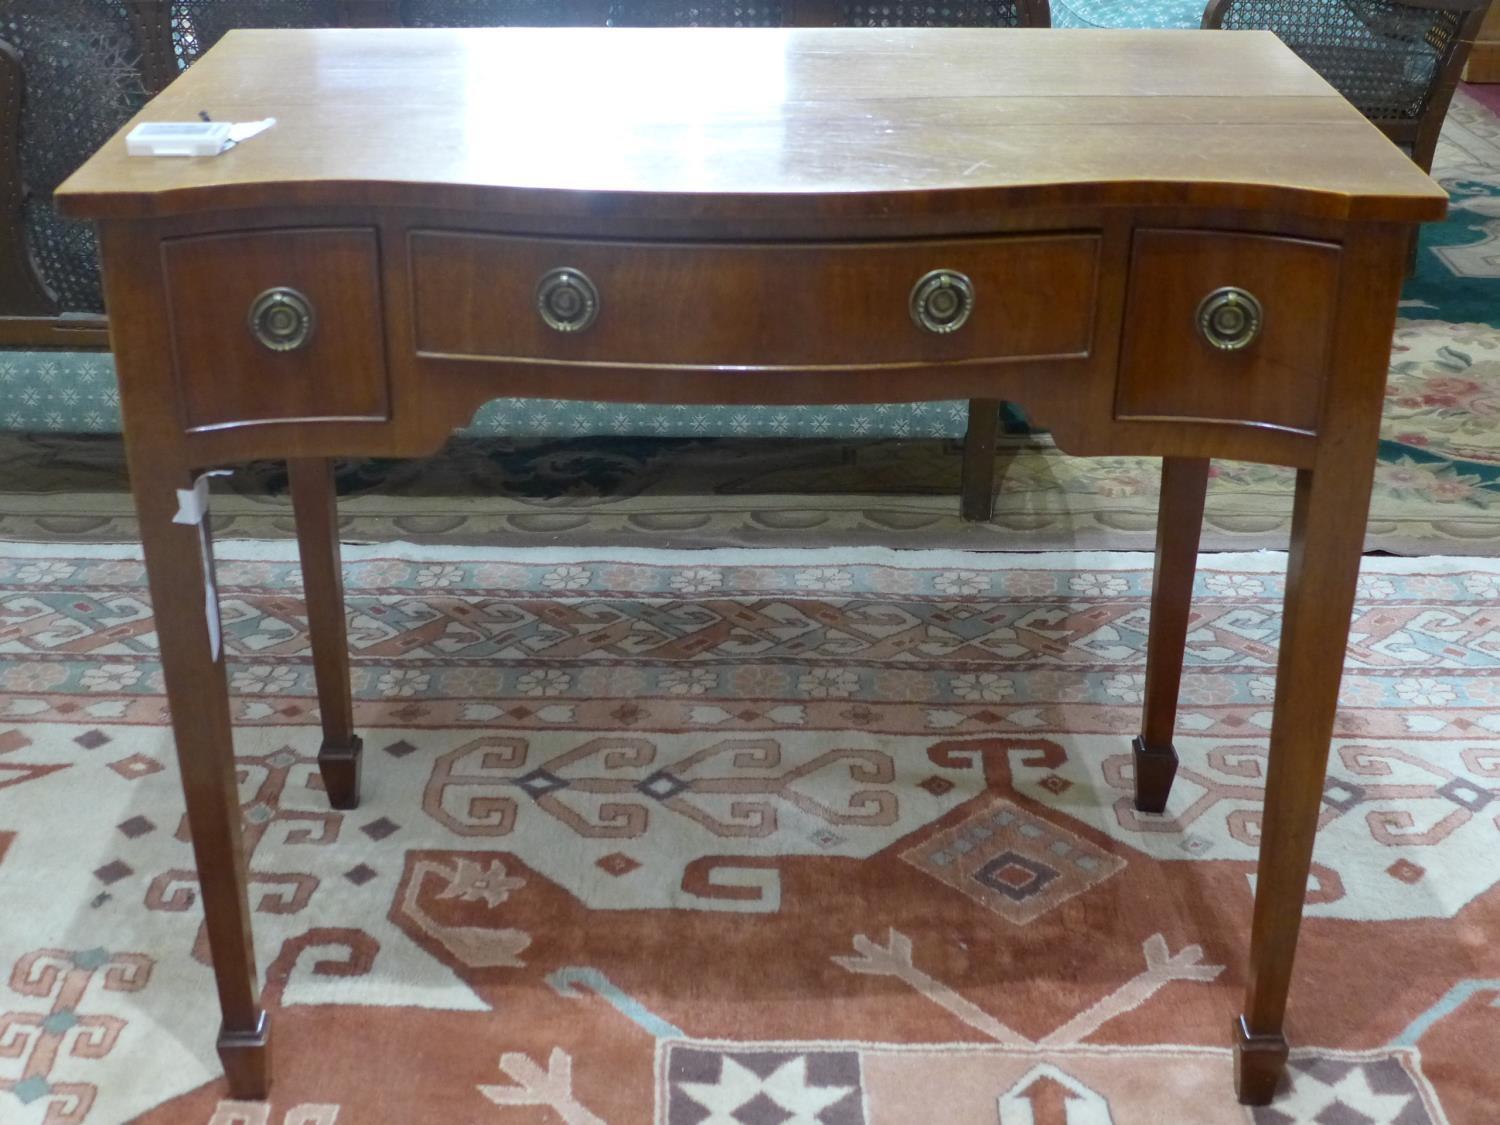 A small early 20th century desk on tapered legs